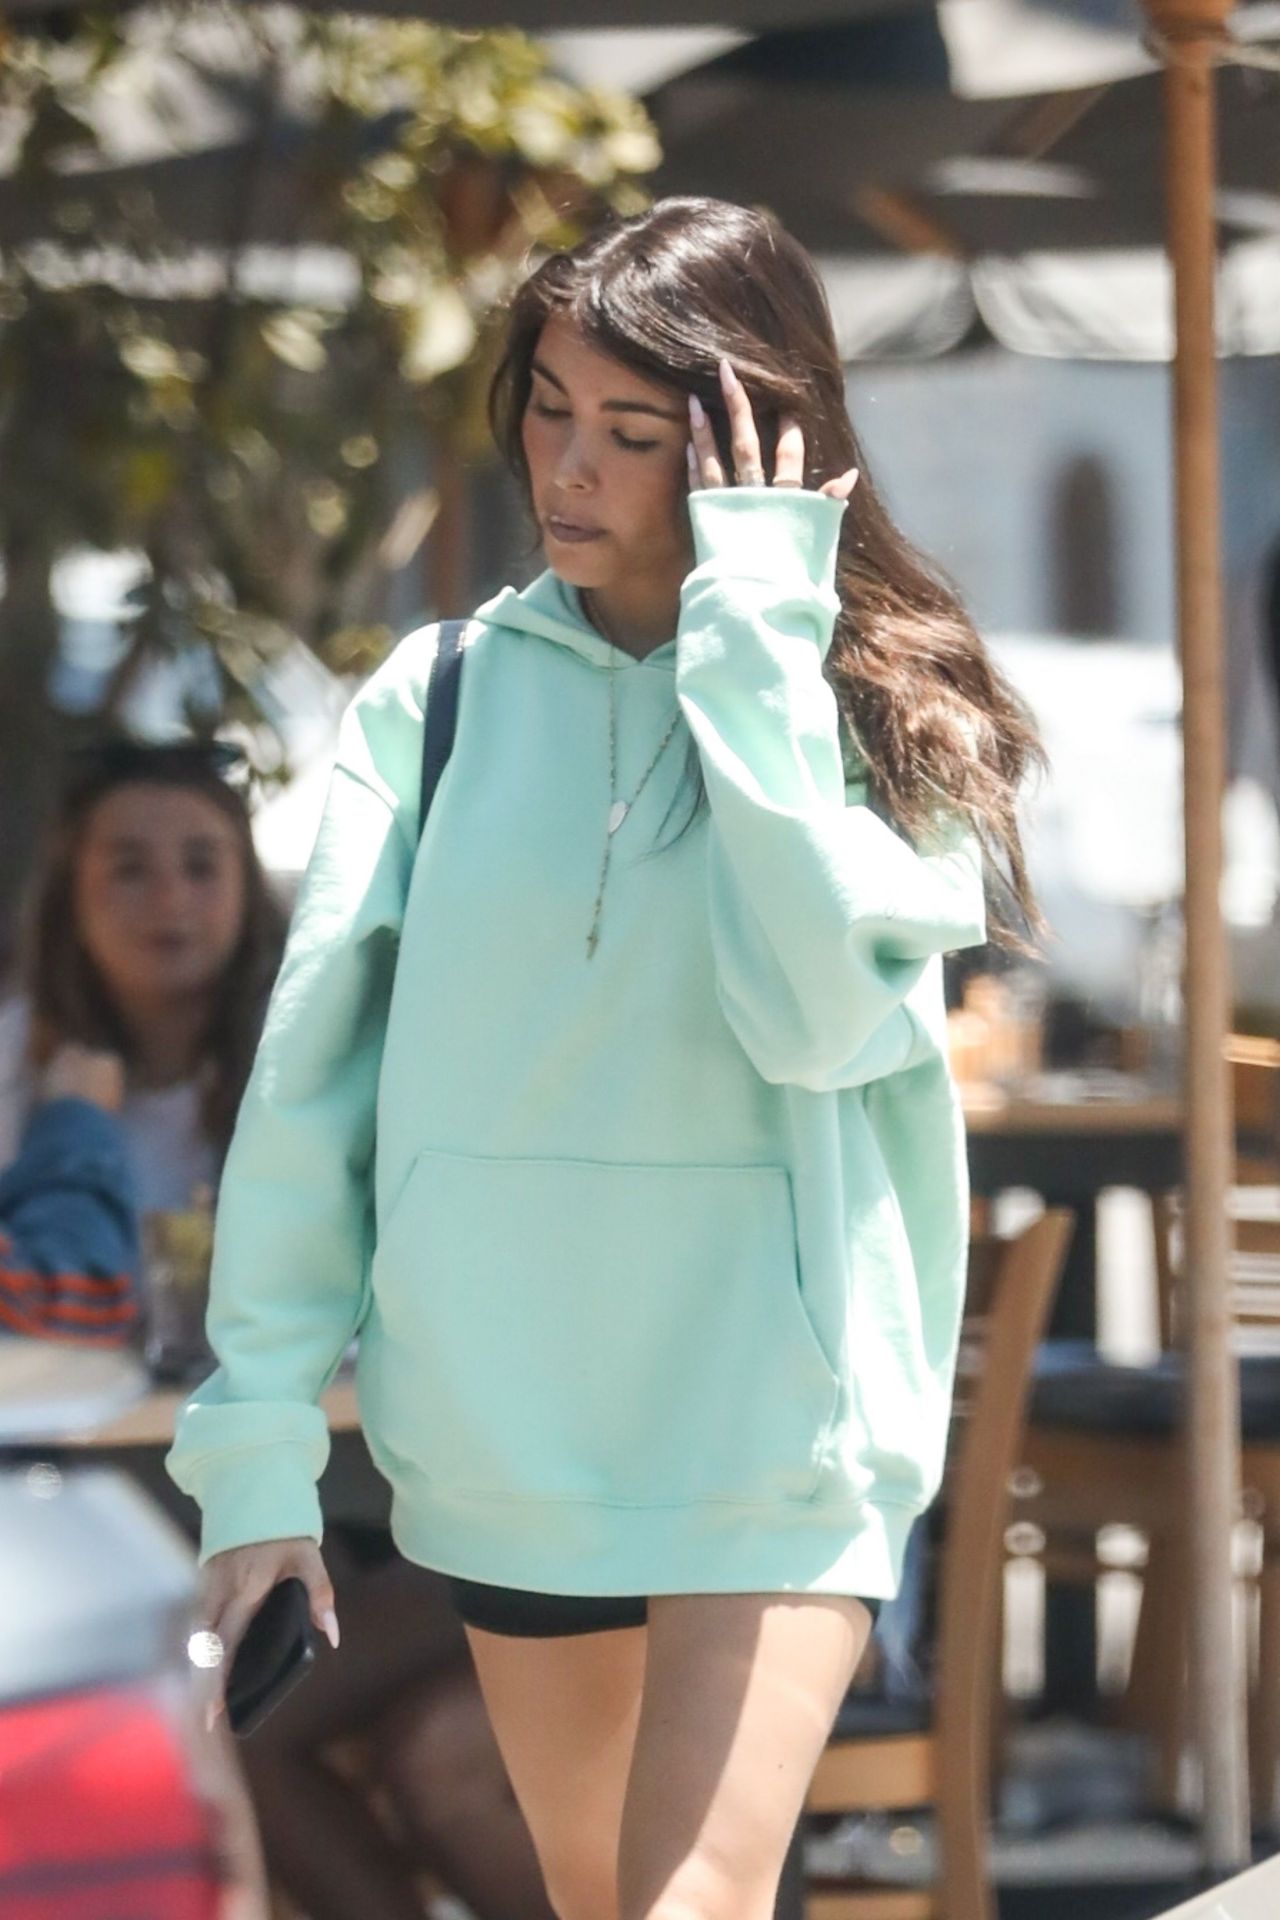 Madison Beer West Hollywood April 18, 2019 – Star Style